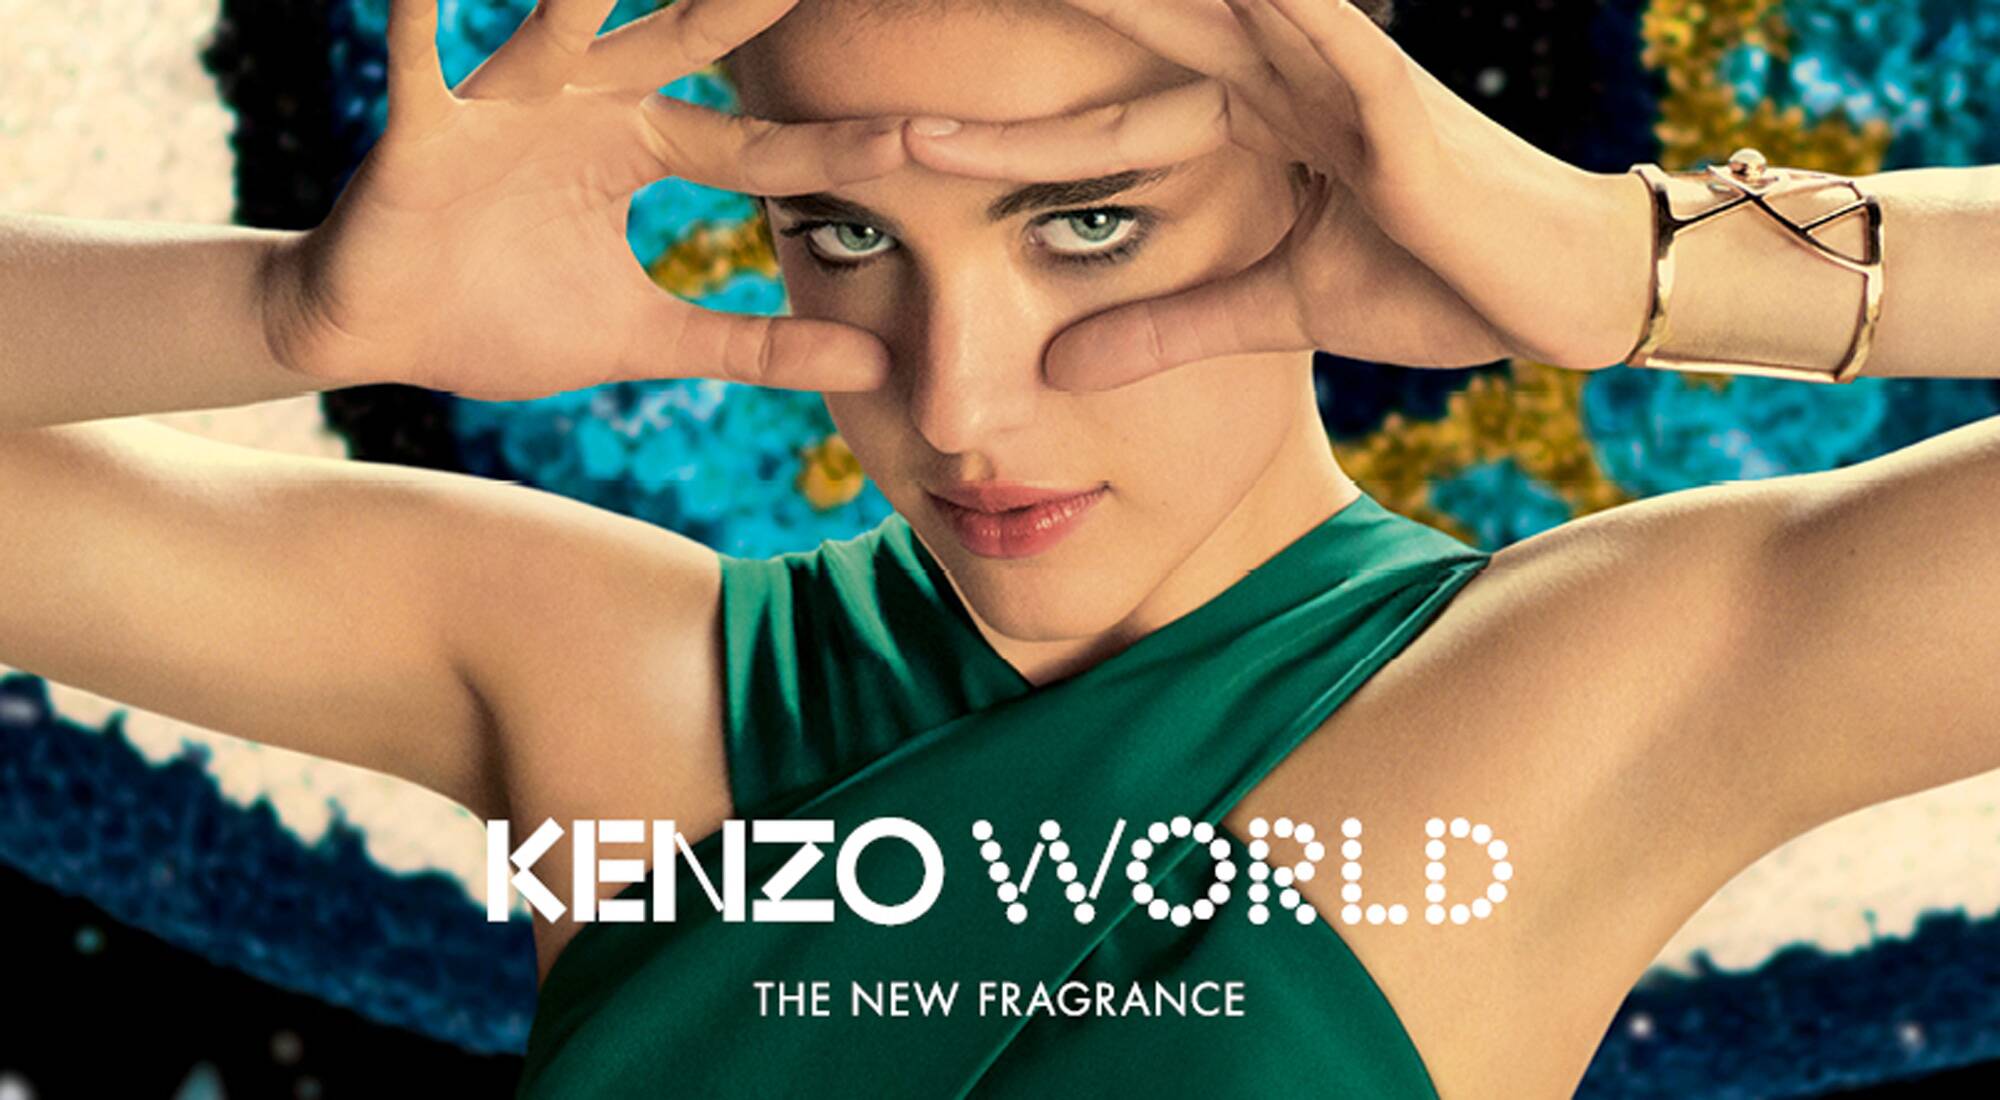 Kenzo World video at Lions Cannes 